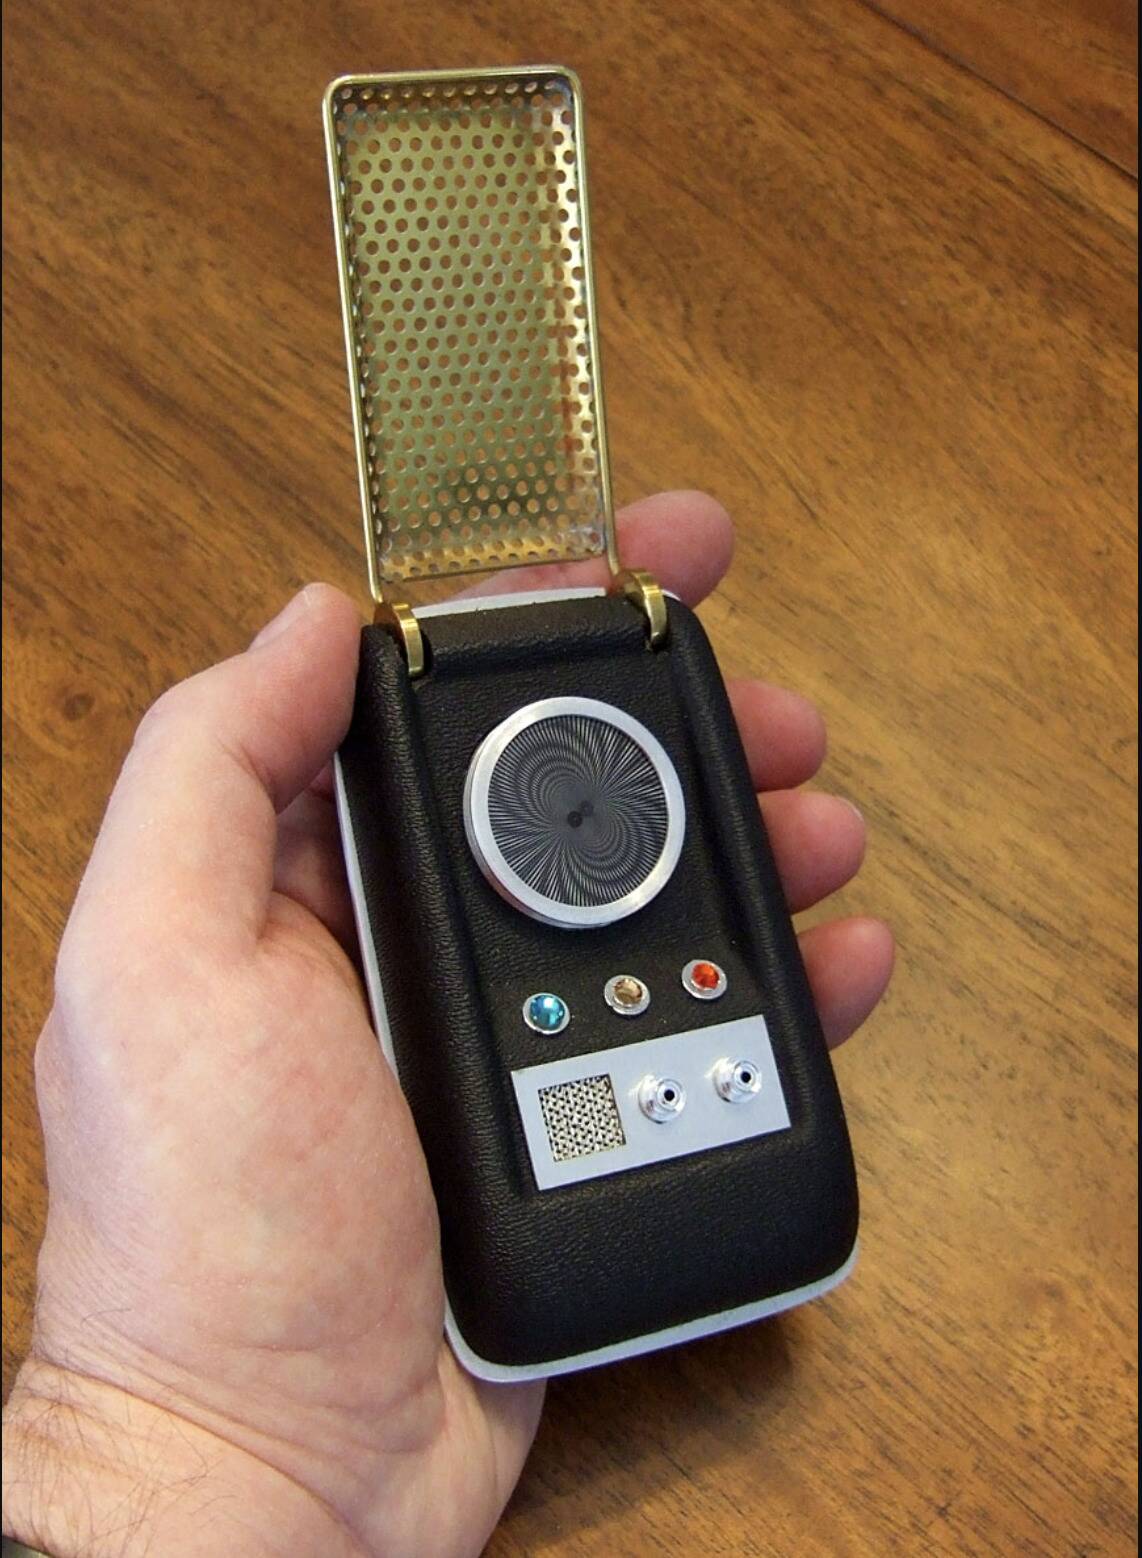 <p>The iconic communicators featured on <i>Star Trek</i> served as a source of inspiration for the design and technology behind flip cell phones. </p> <p>The first flip phone, the Motorola StarTAC, was introduced in 1996 by Motorola in the United States. Its sleek, compact form factor and ability to flip open and close echoed the futuristic communication devices seen in the beloved science fiction series.</p>